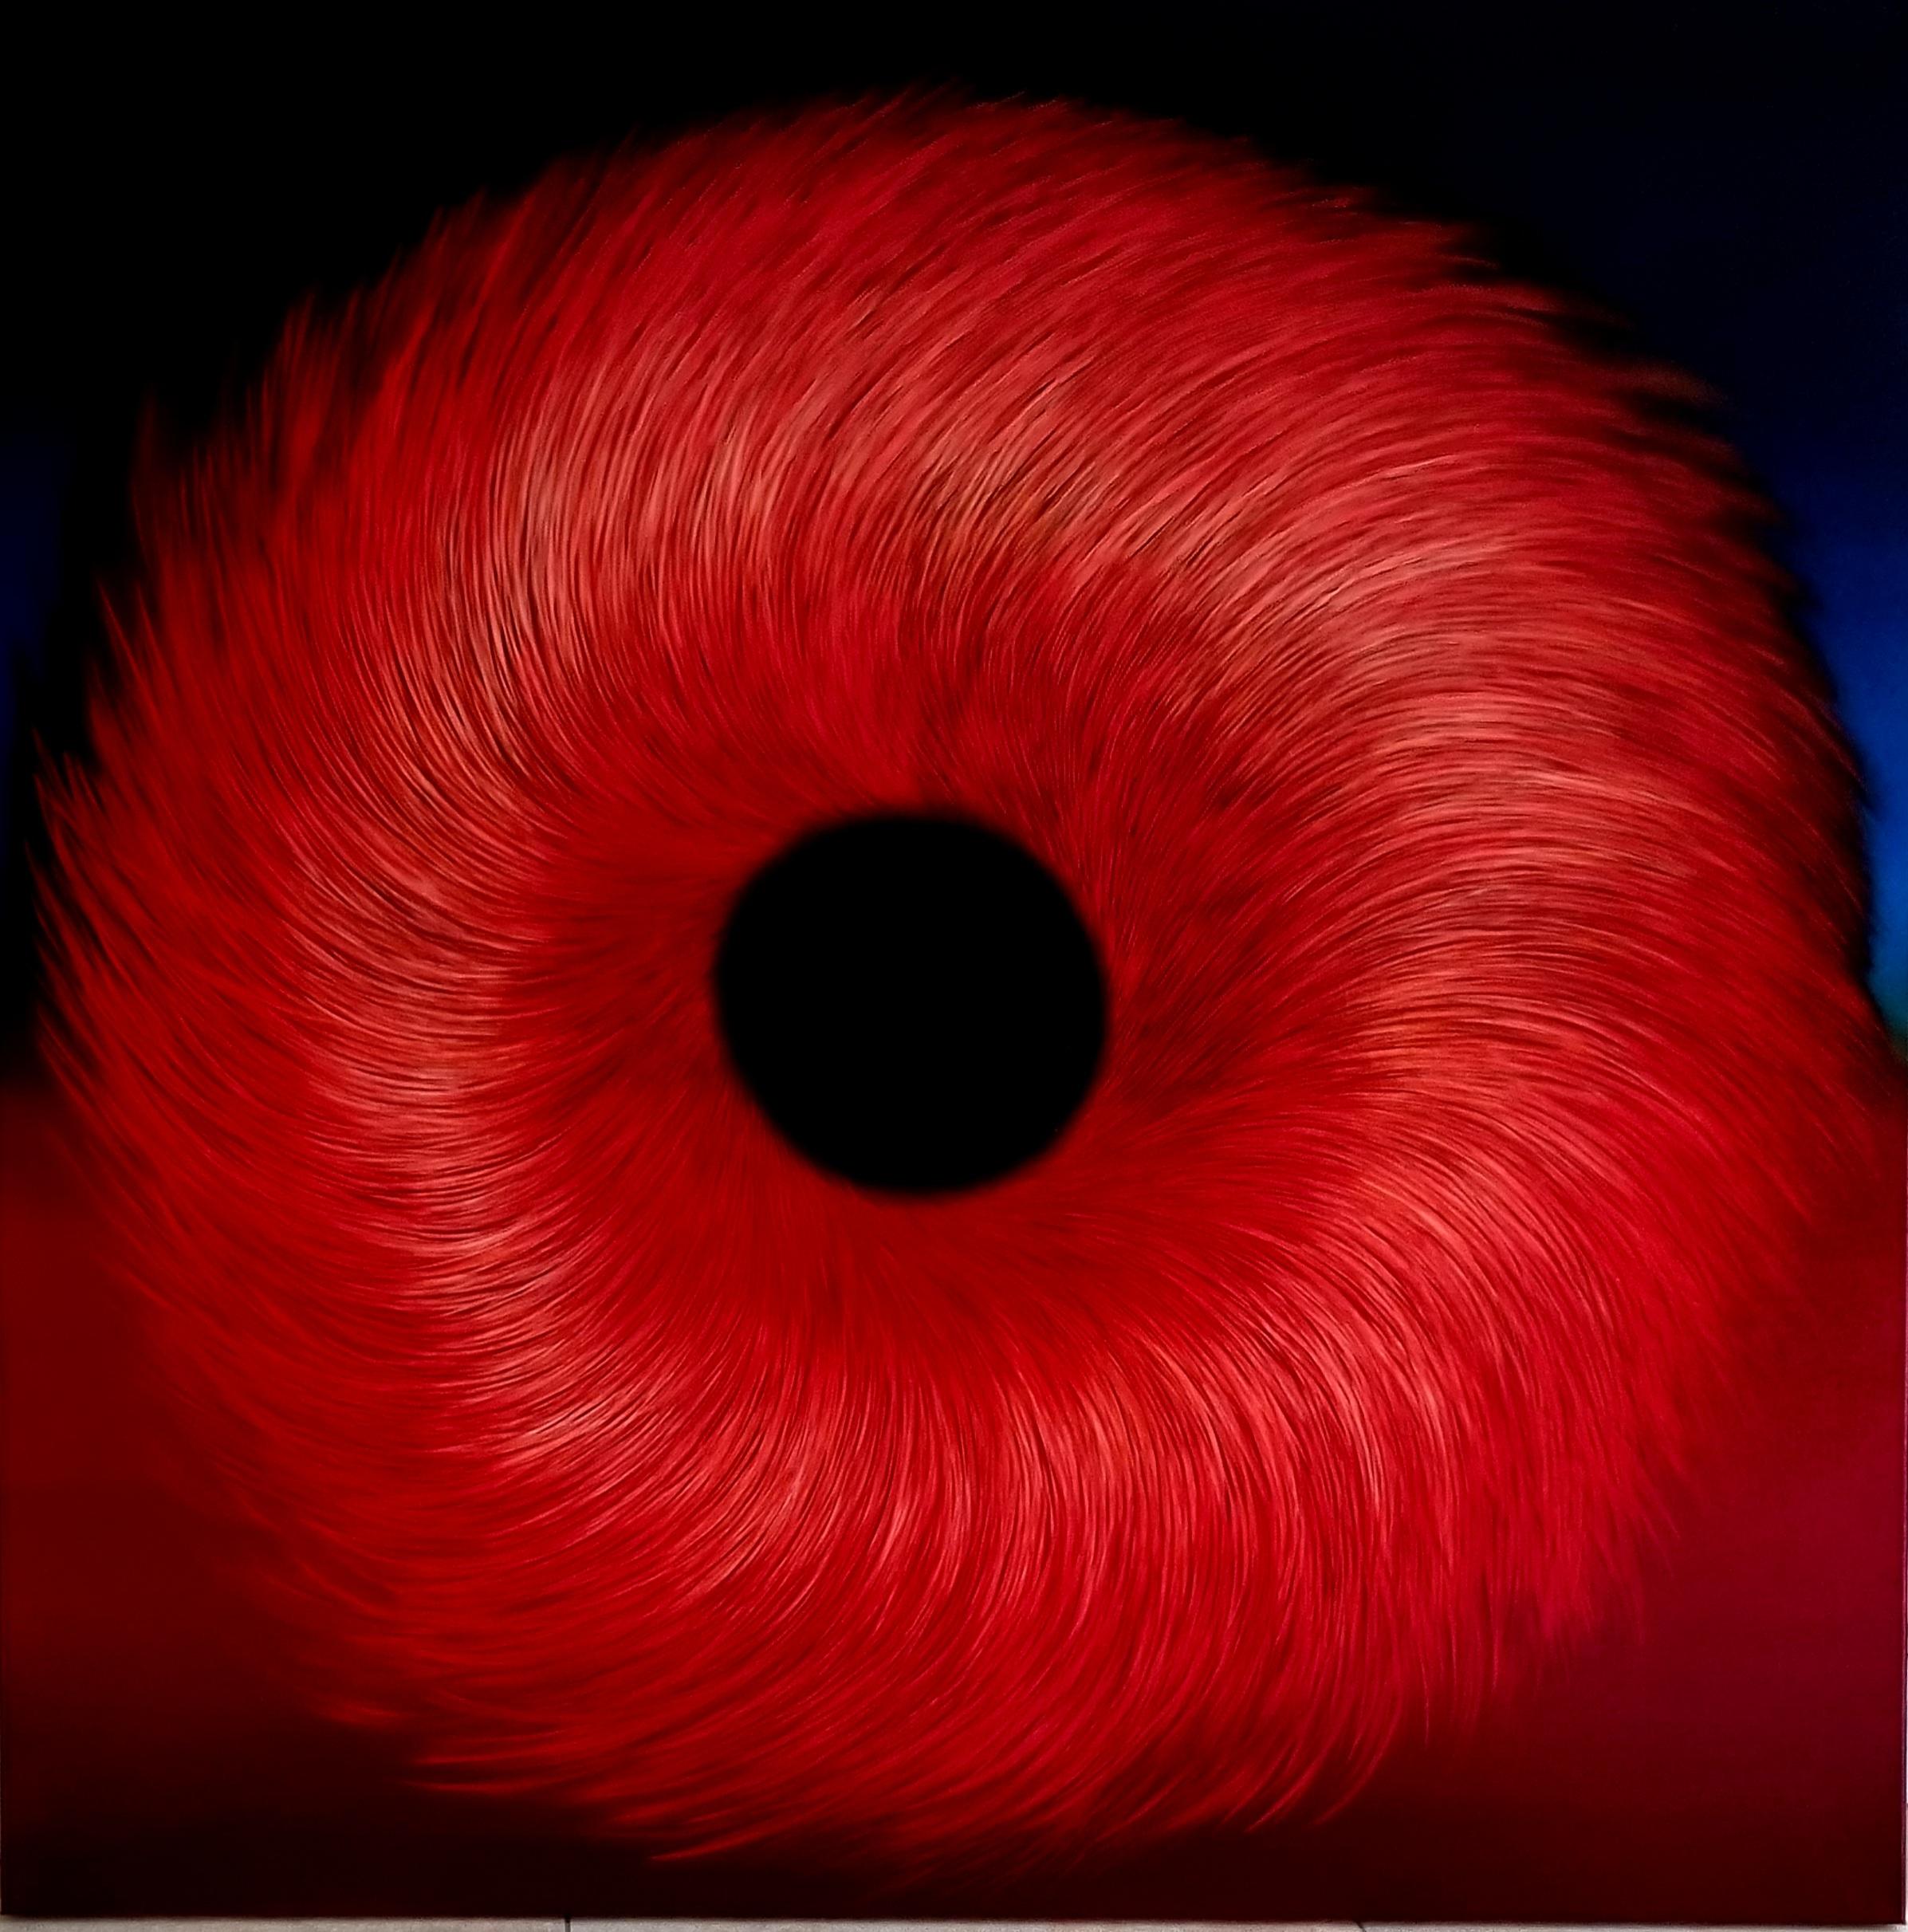 Motion - Painting by Frans de Bruyn